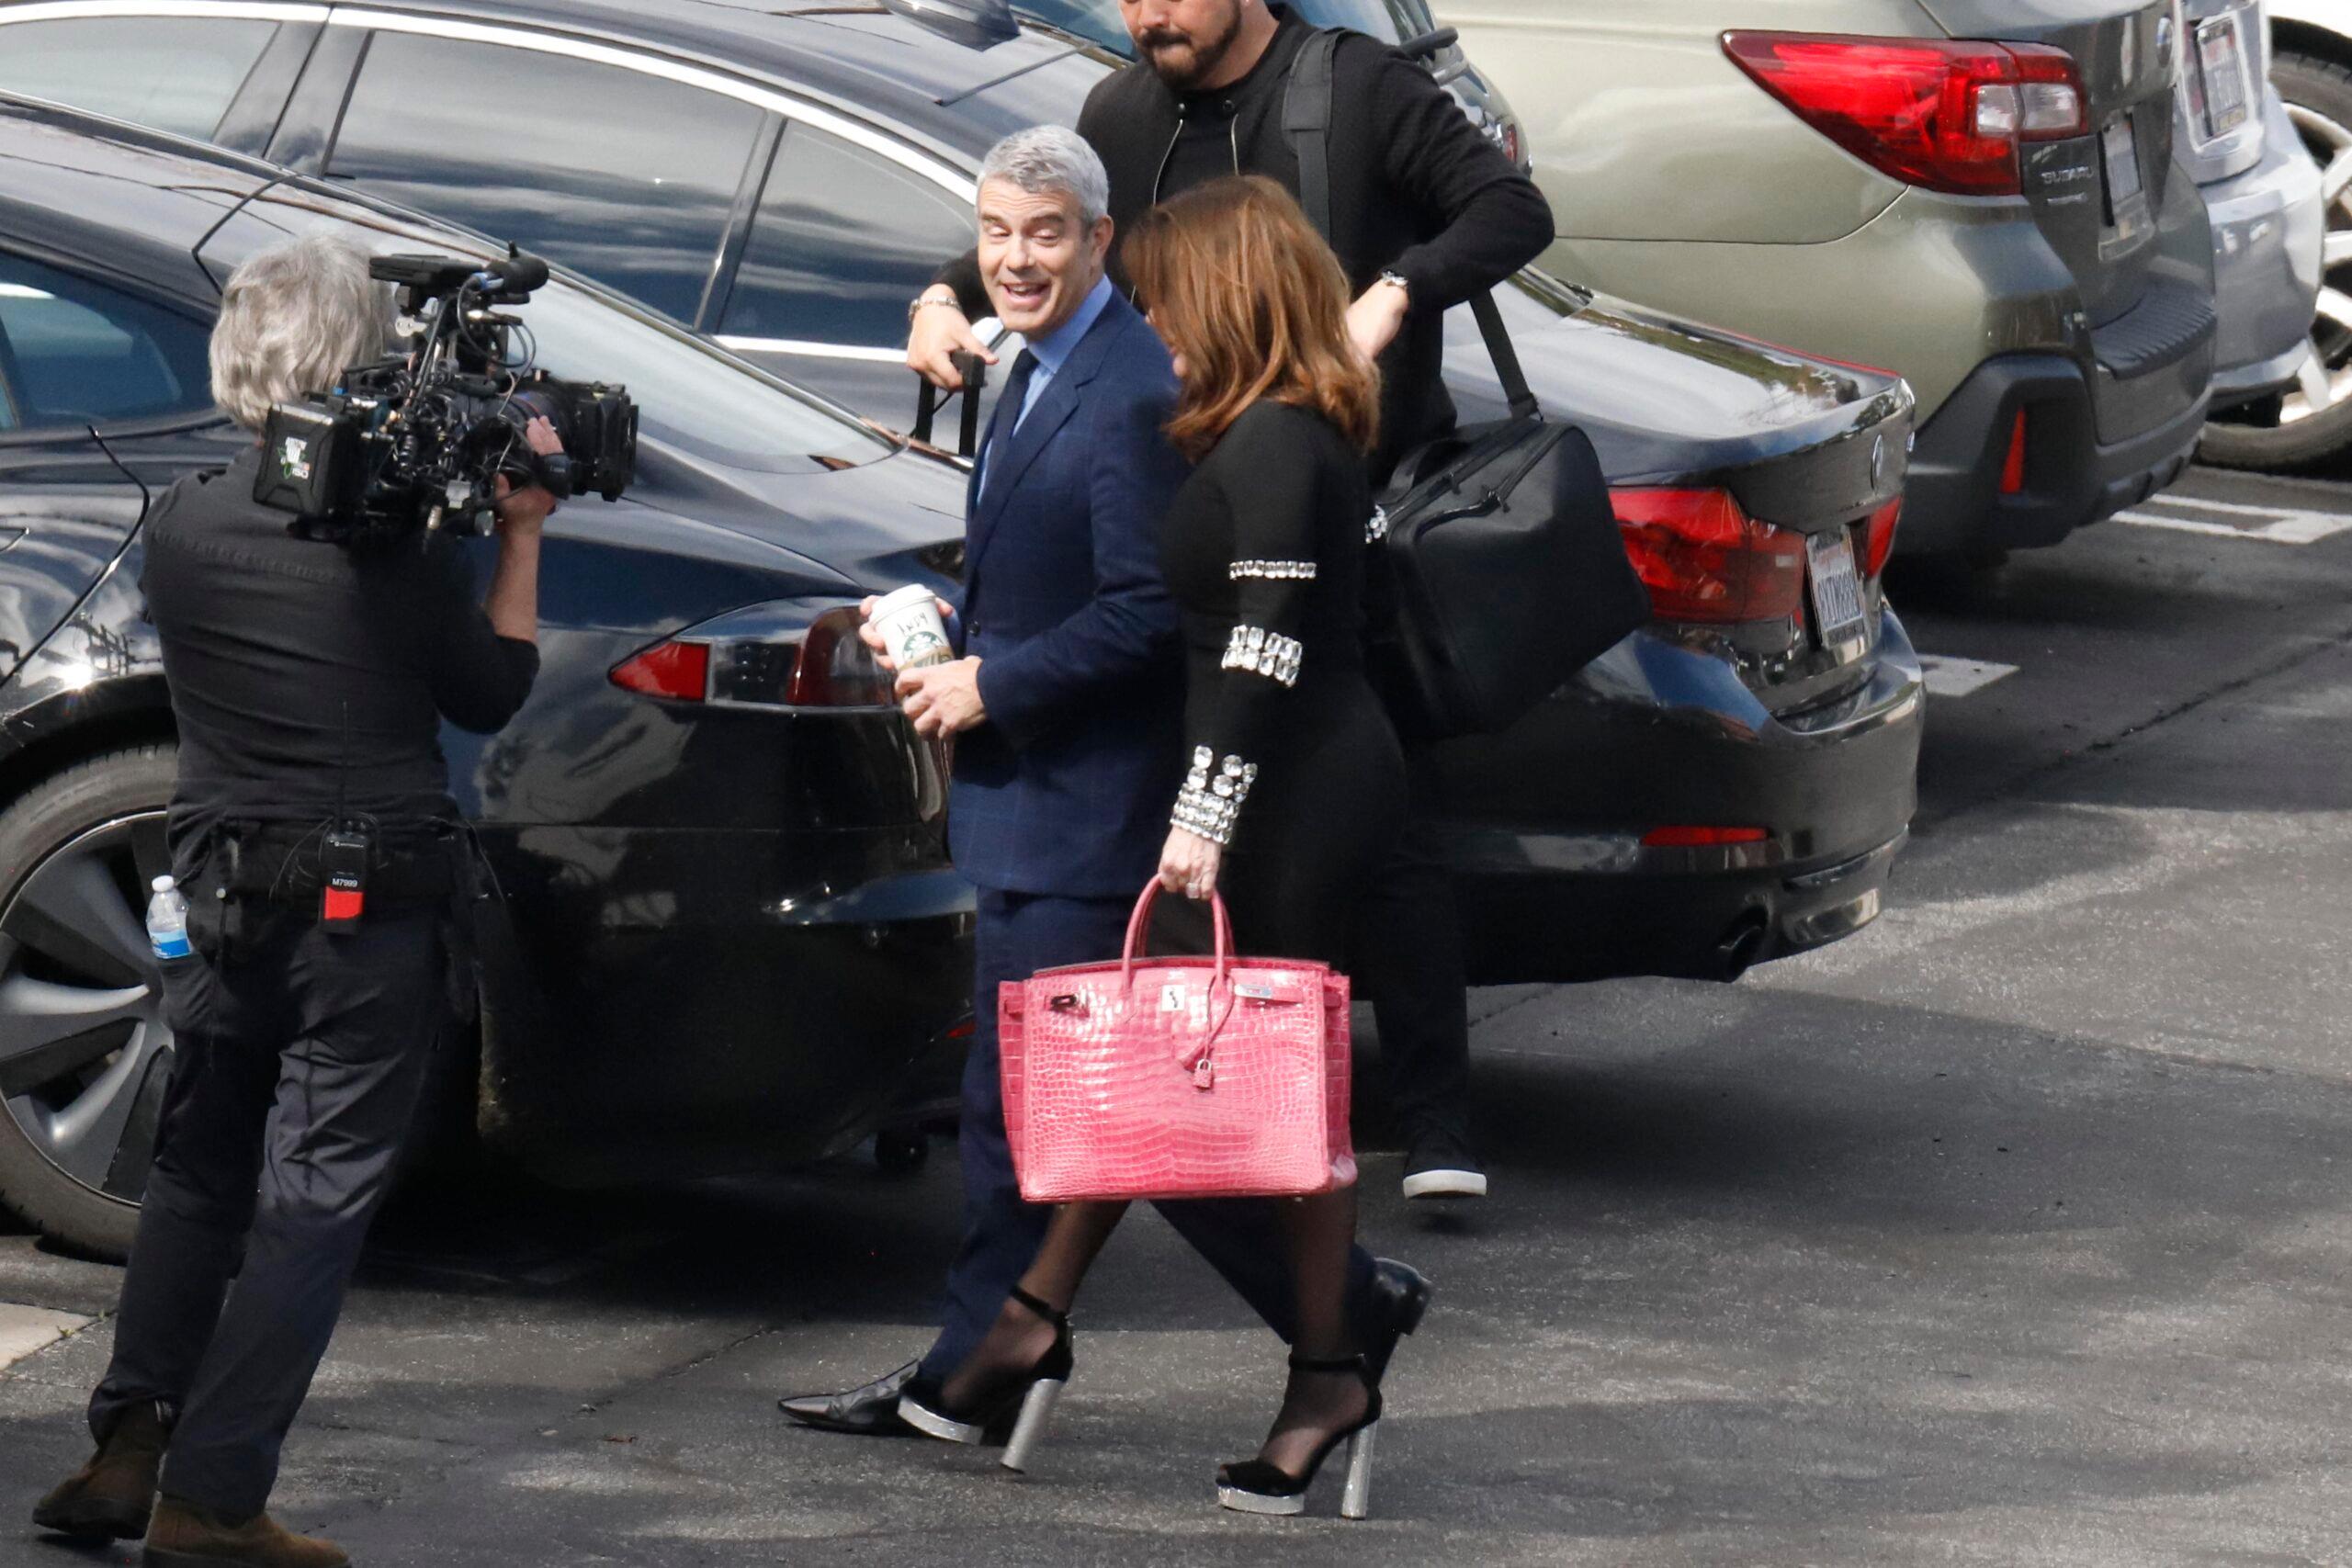 Ariana Madix Andy Cohen Scheana Shay and Lisa Vanderpump are seen arriving on set to film Vanderpump Rules reunion